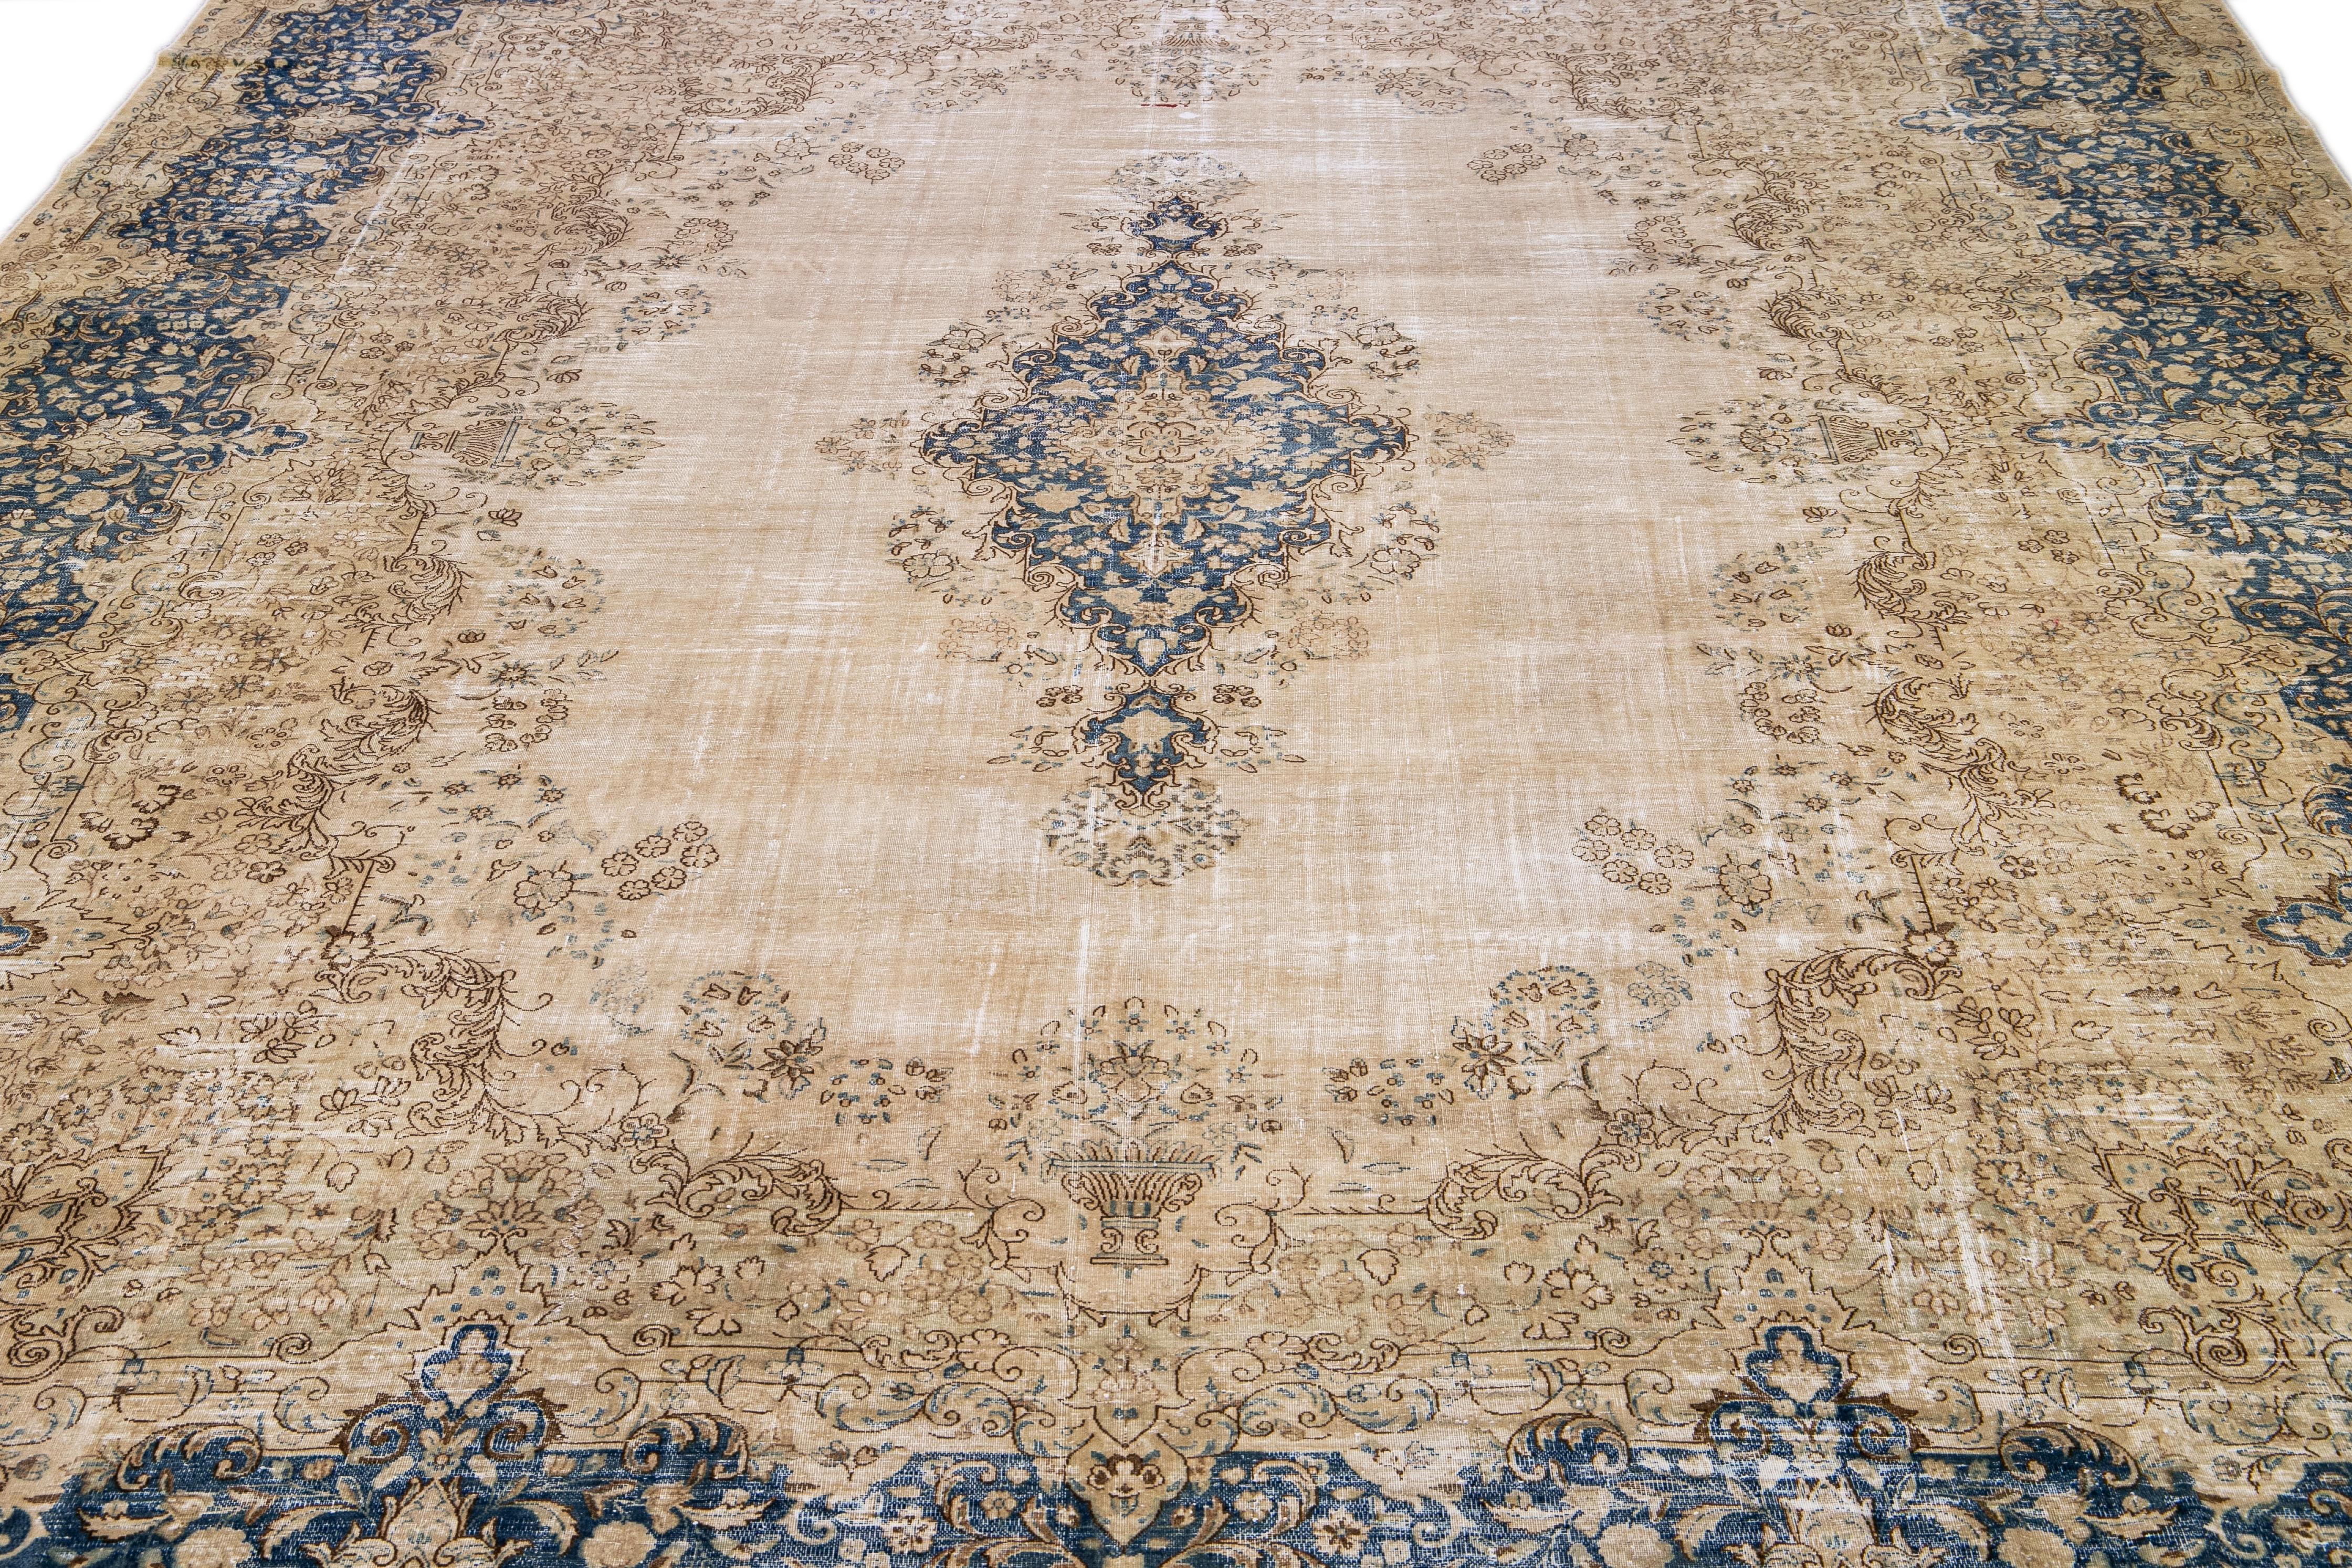 Beautiful vintage Persian distressed hand-knotted wool rug with a beige field. This piece has a blue frame with brown accents in a medallion design.

This rug measures: 12'7 x 17'5.

Our rugs are professional cleaning before shipping.